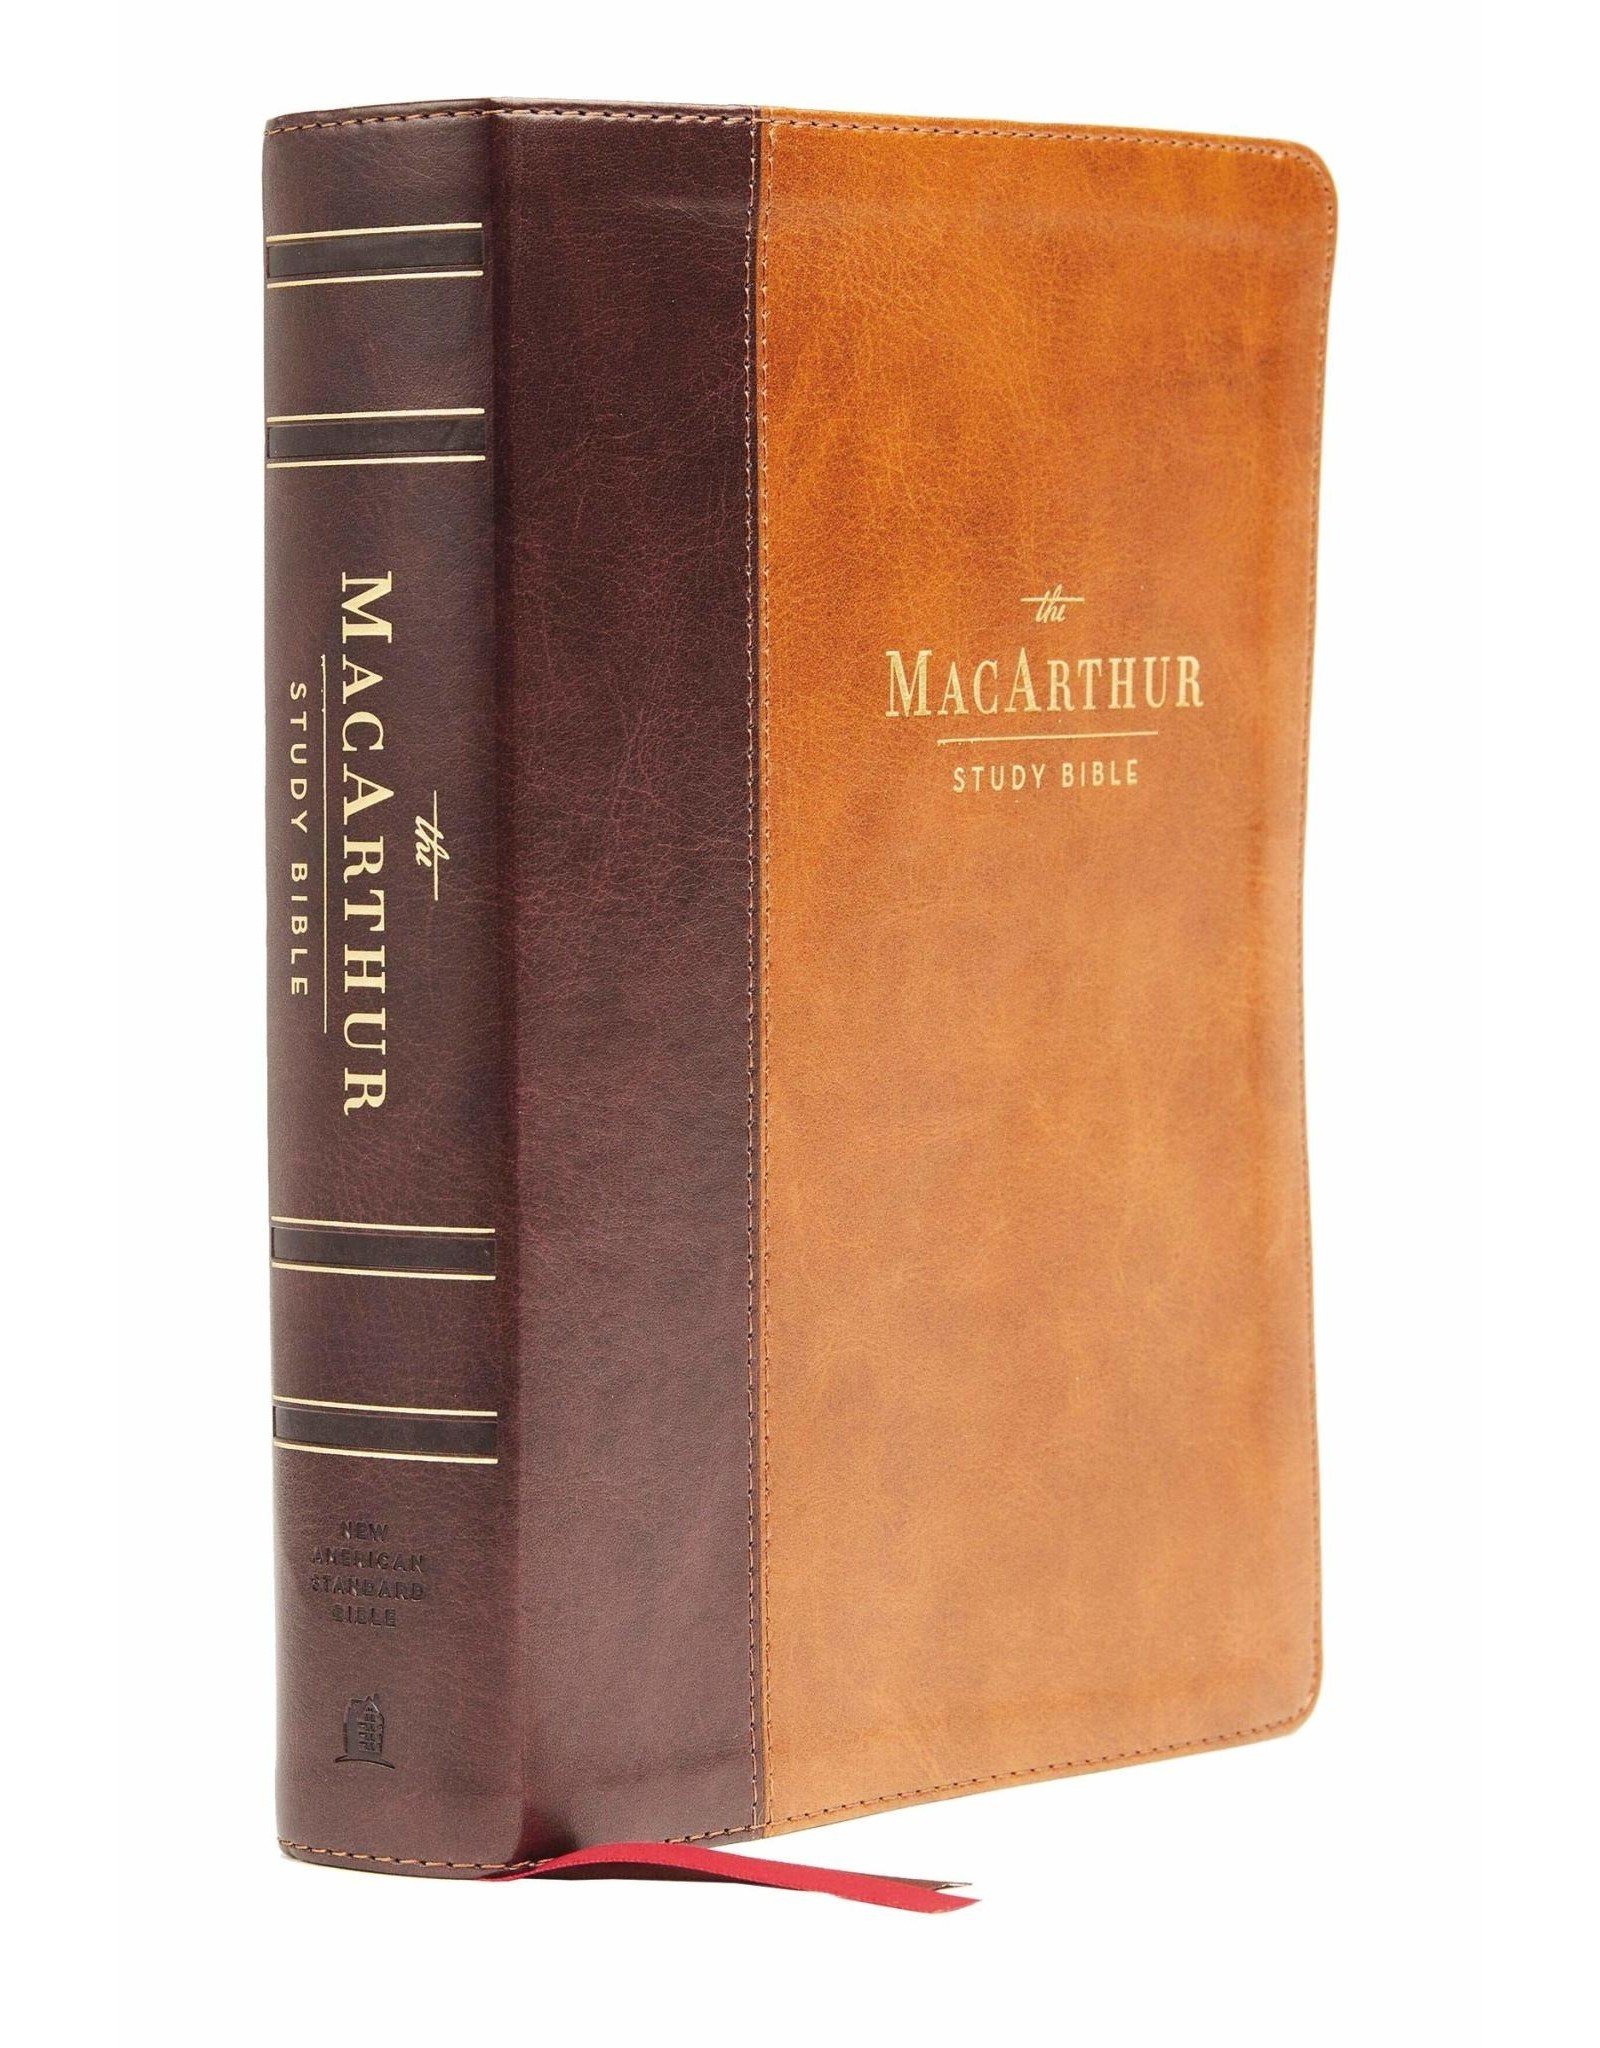 Harper Collins / Thomas Nelson / Zondervan NASB MSB MacArthur Study Bible (2nd Edition, Leathersoft, Brown, Thumb Indexed)